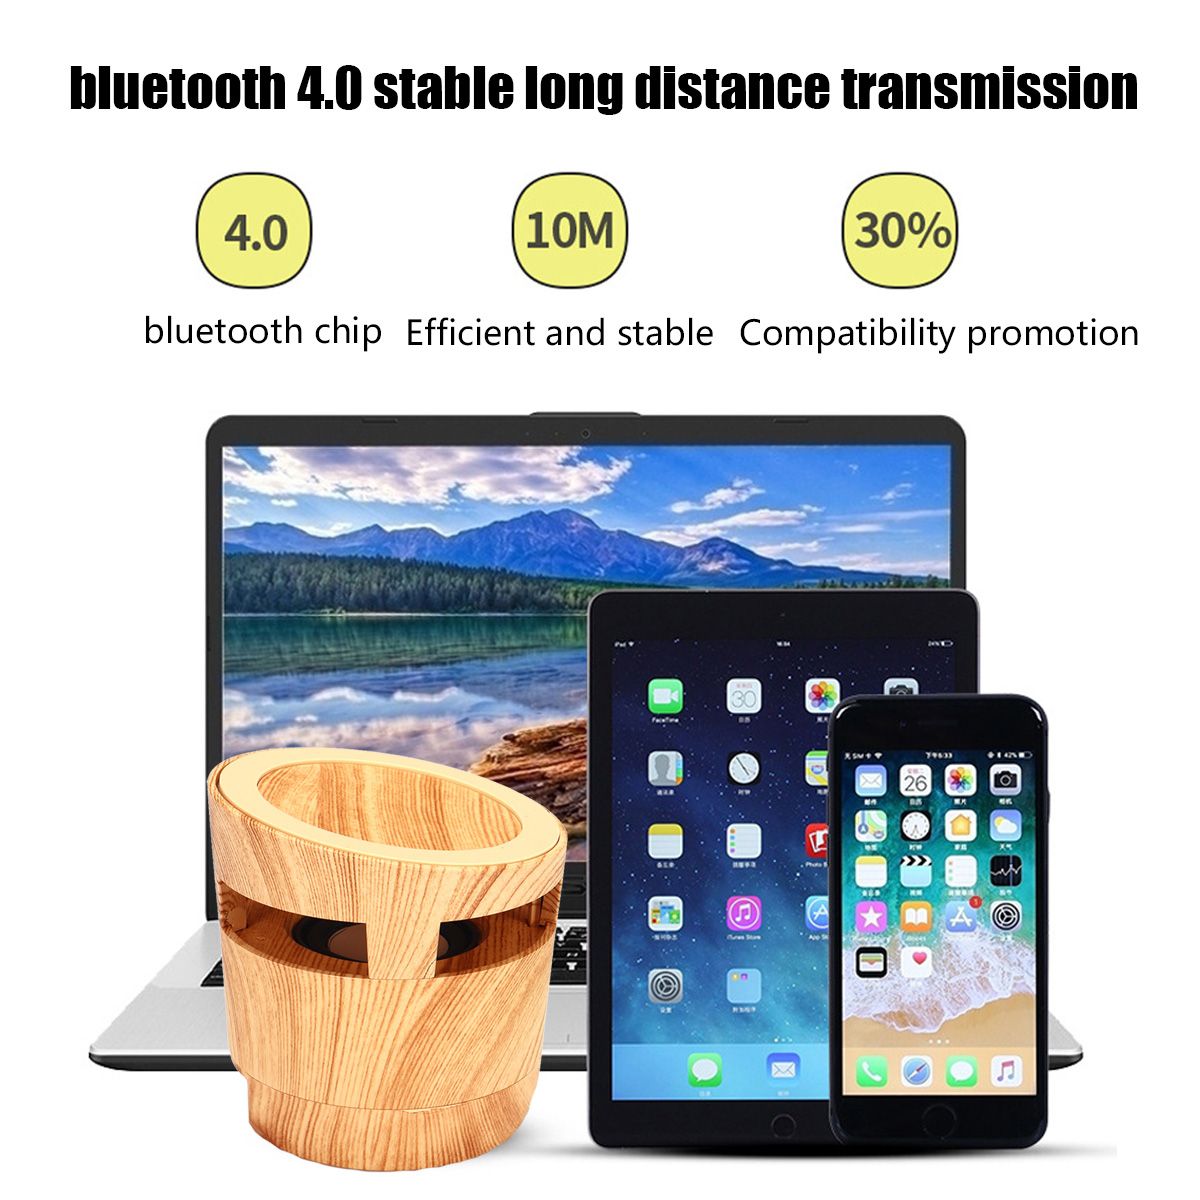 Portable-5W-2-in-1-Wireless-Charger-bluetooth-Hifi-Stereo-Speaker-Music-Player-Built-in-300mA-Batter-1652633